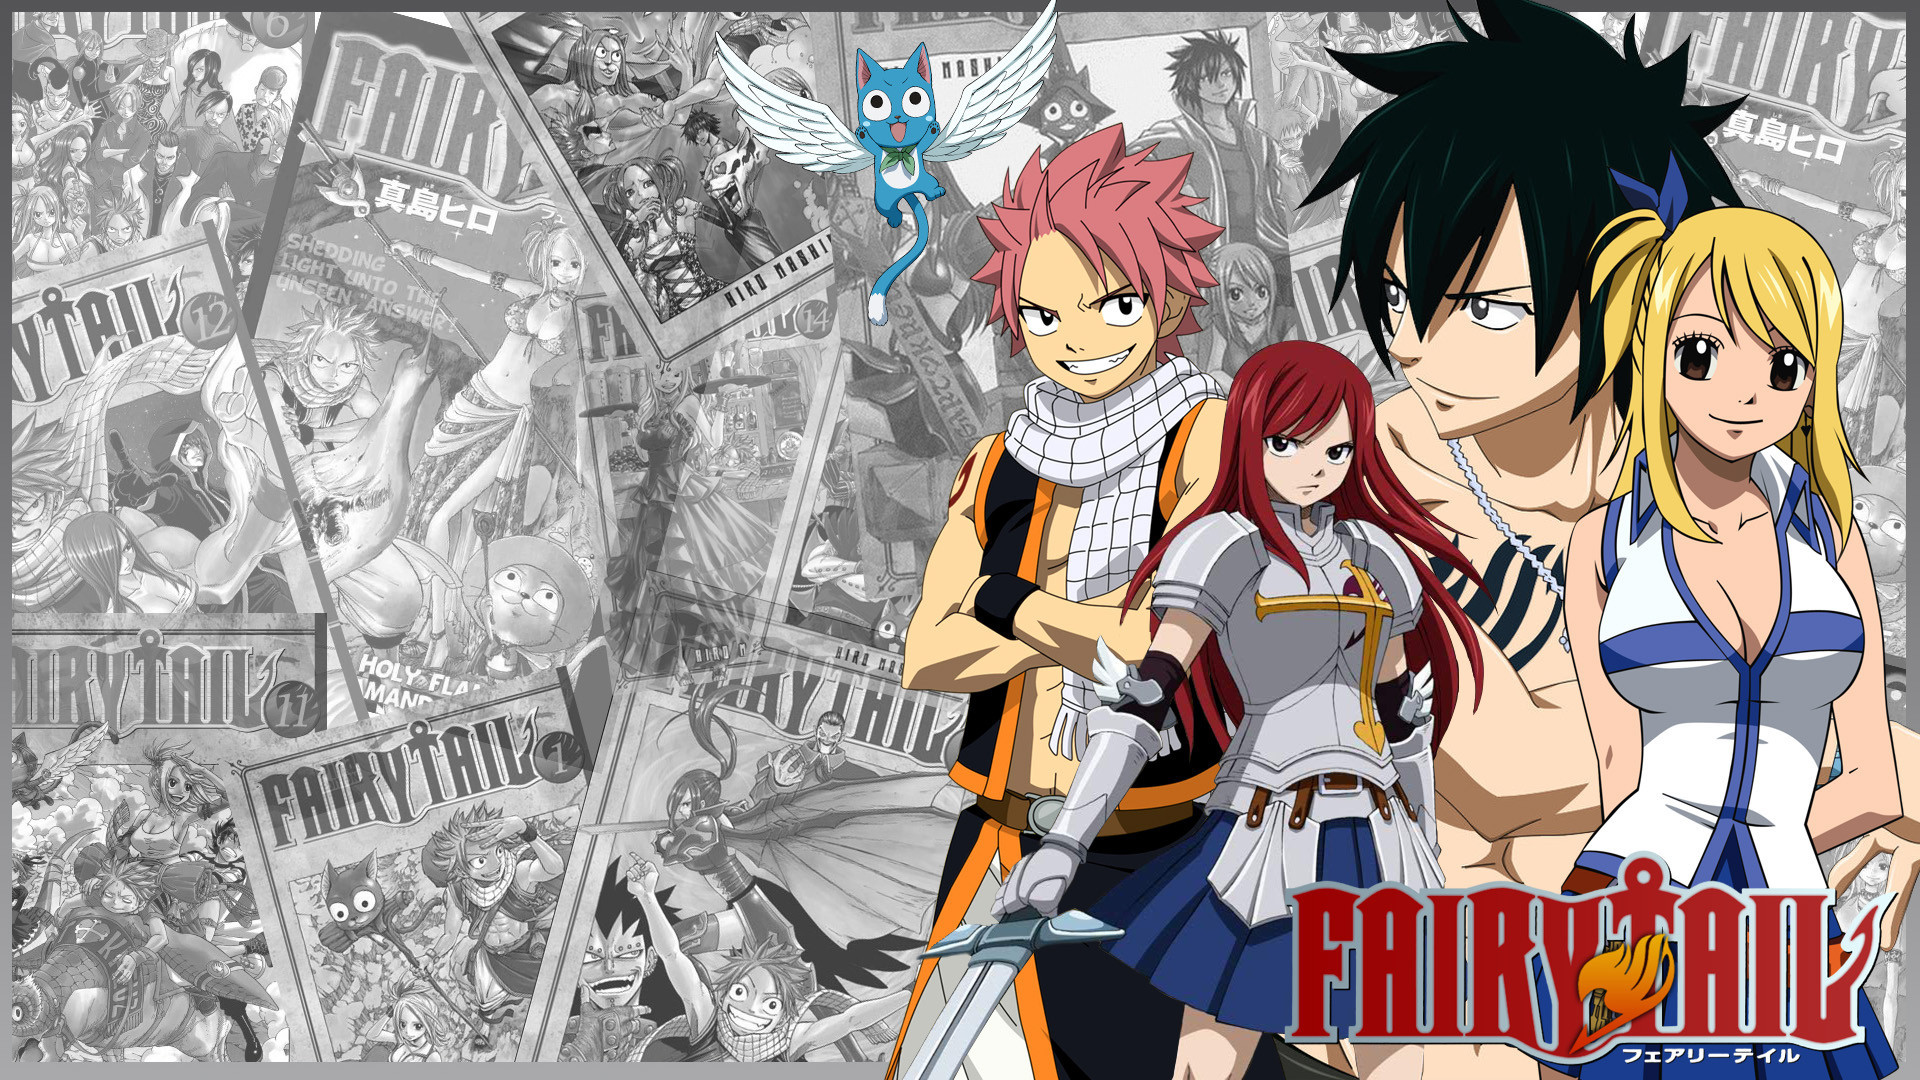 1920x1080 Cool Fairy Tail Wallpapers Group